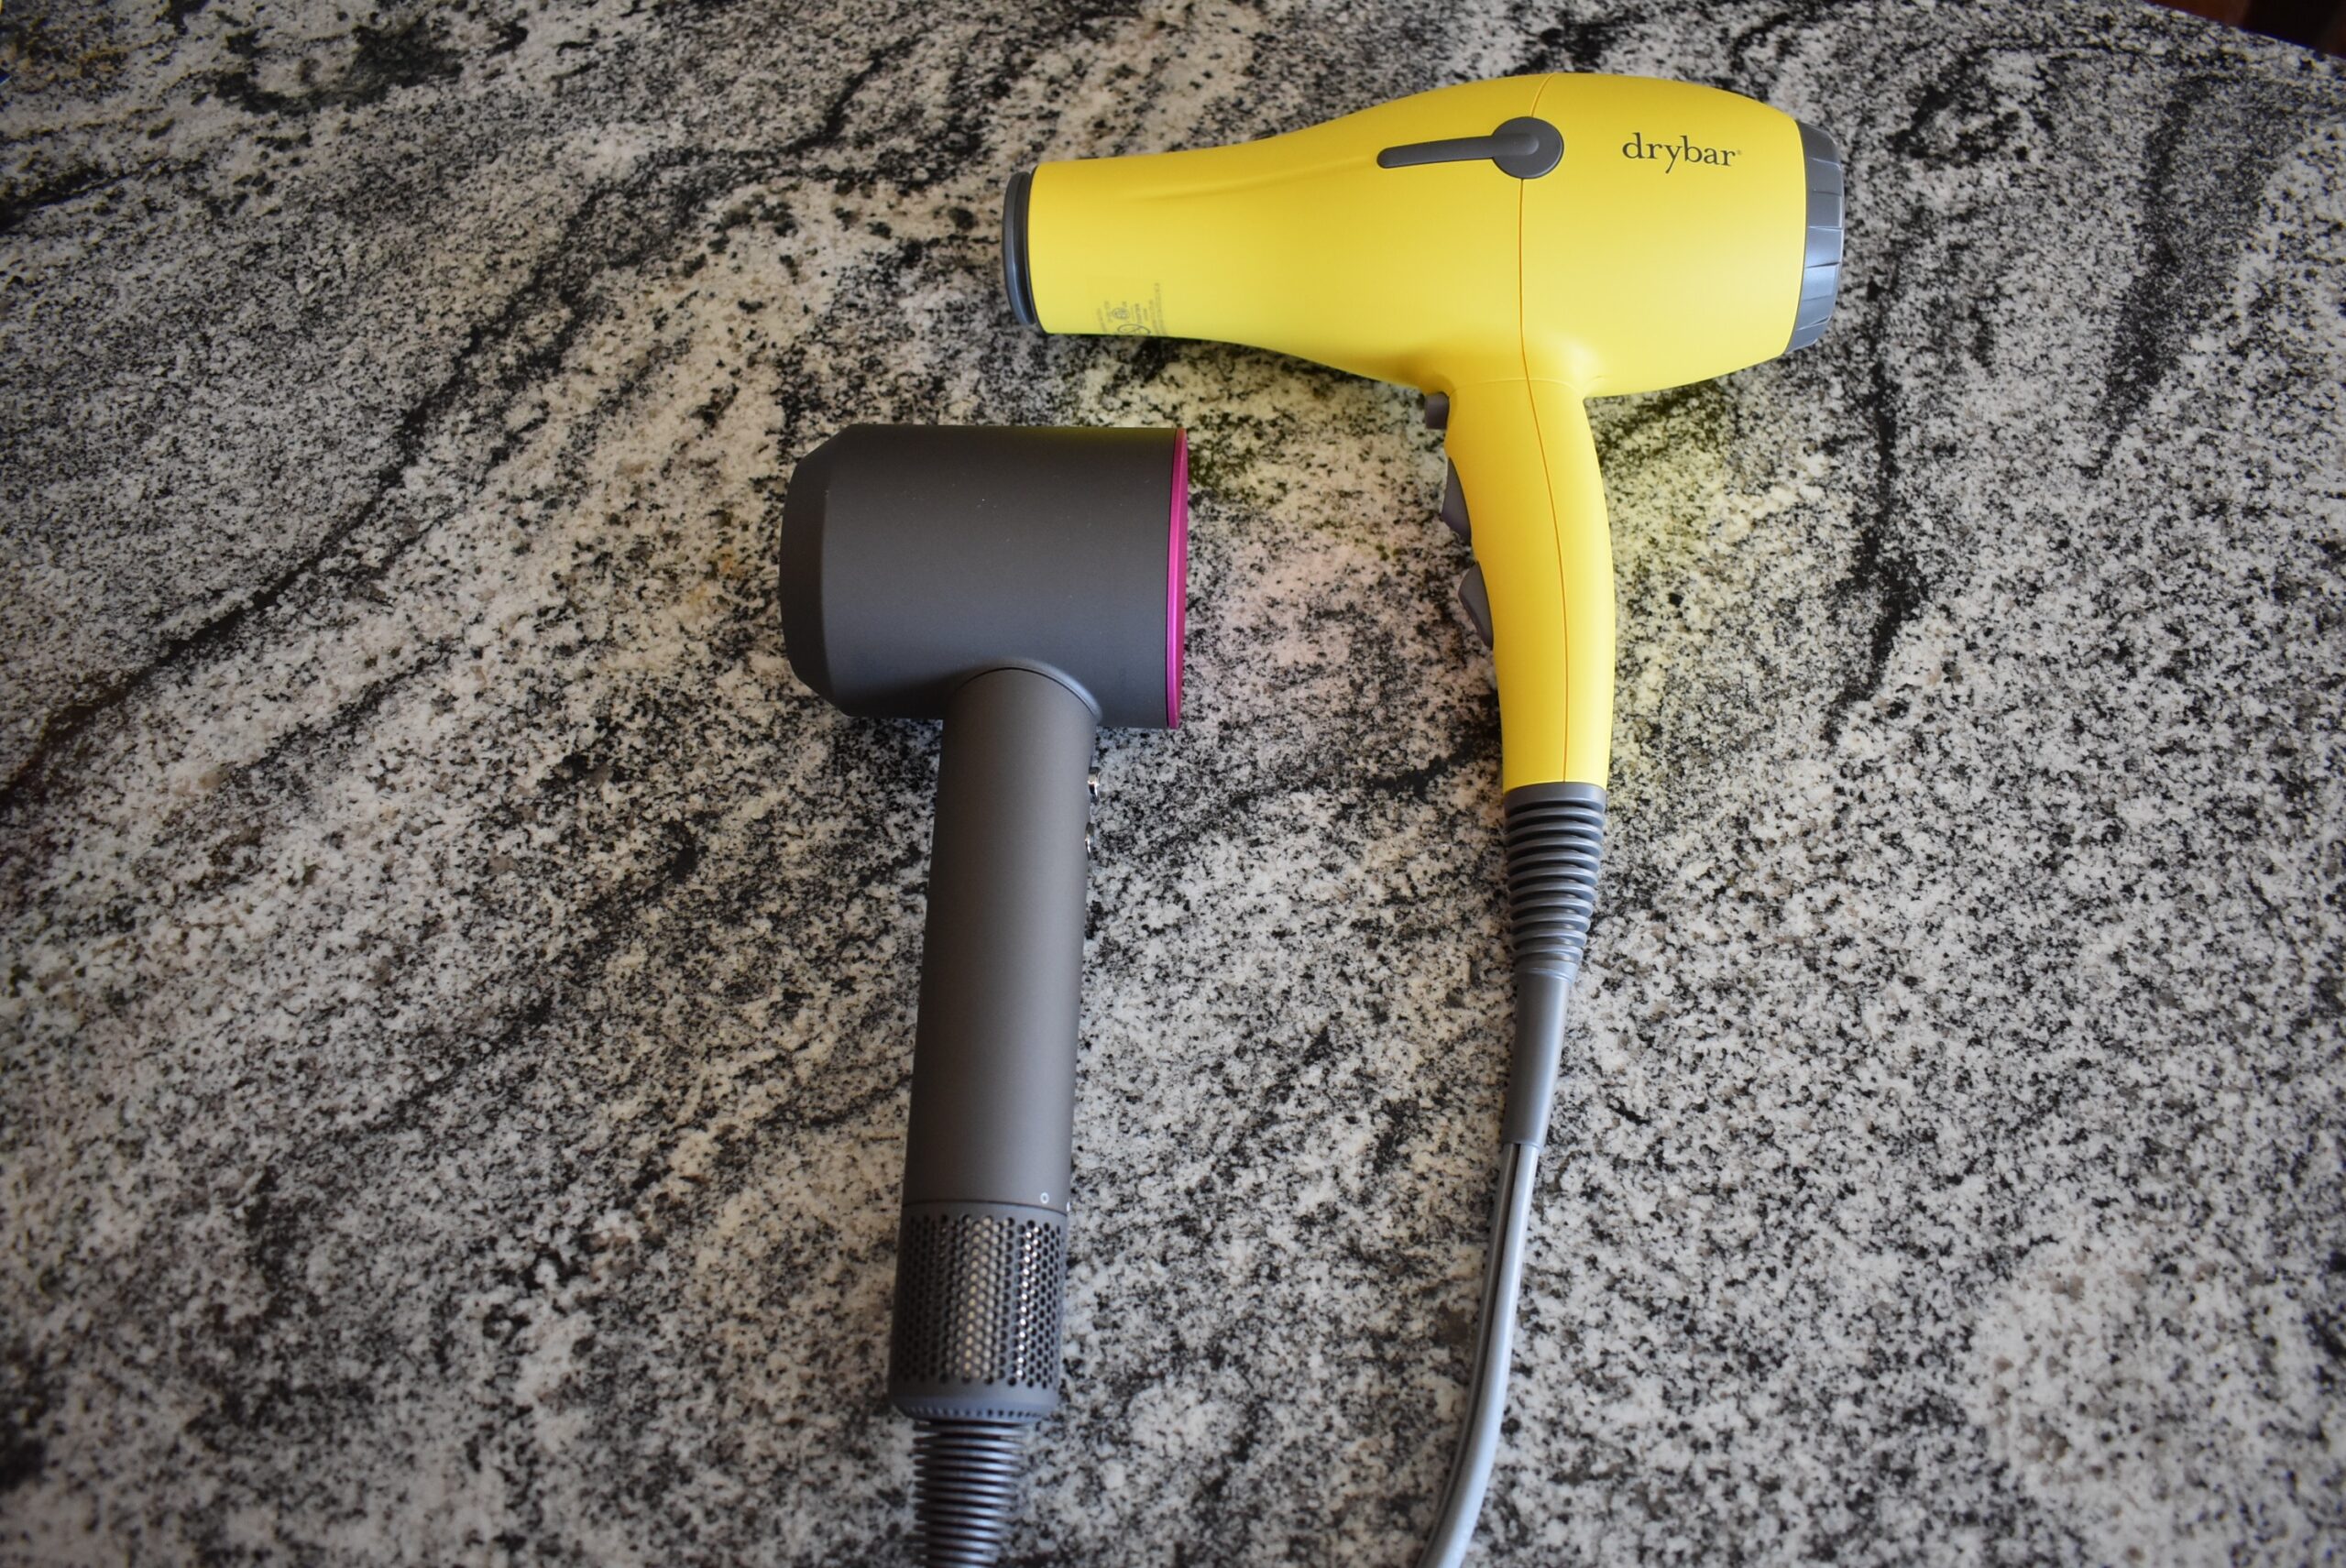 To help answer is the dyson hair dryer worth it, the appliance sits on a counter next to the Drybar buttercup